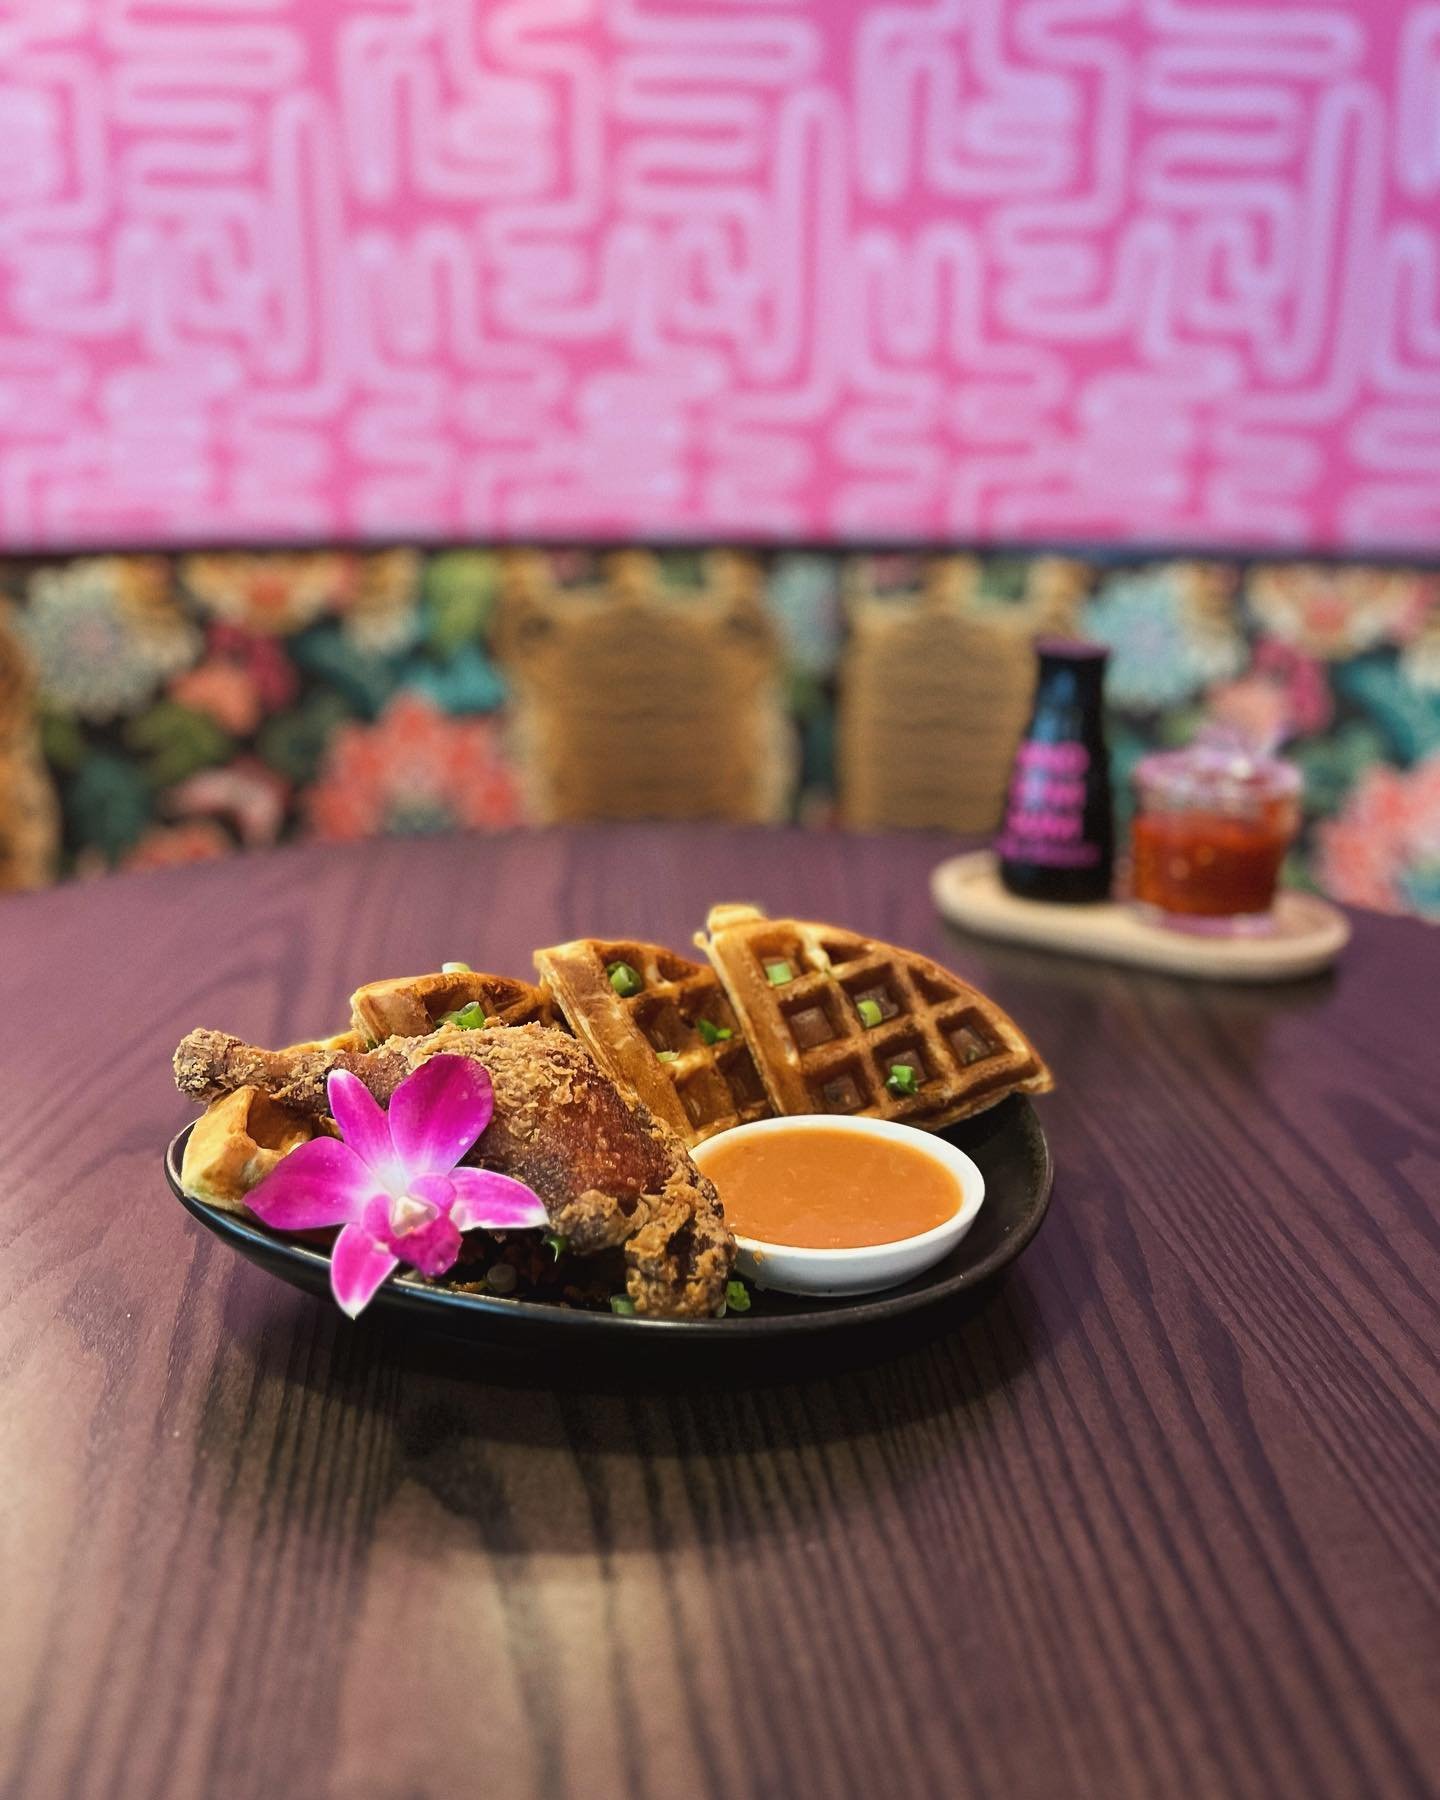 Happy grad weekend + early mama&rsquo;s day 🌺✨🥰 We&rsquo;re ready to celebrate with you all weekend! 

Reserve a table for Sunday brunch to treat yourself to our fried duck leg + scallion waffle special (served with a tasty lil plum sauce) 🤤💗

#m